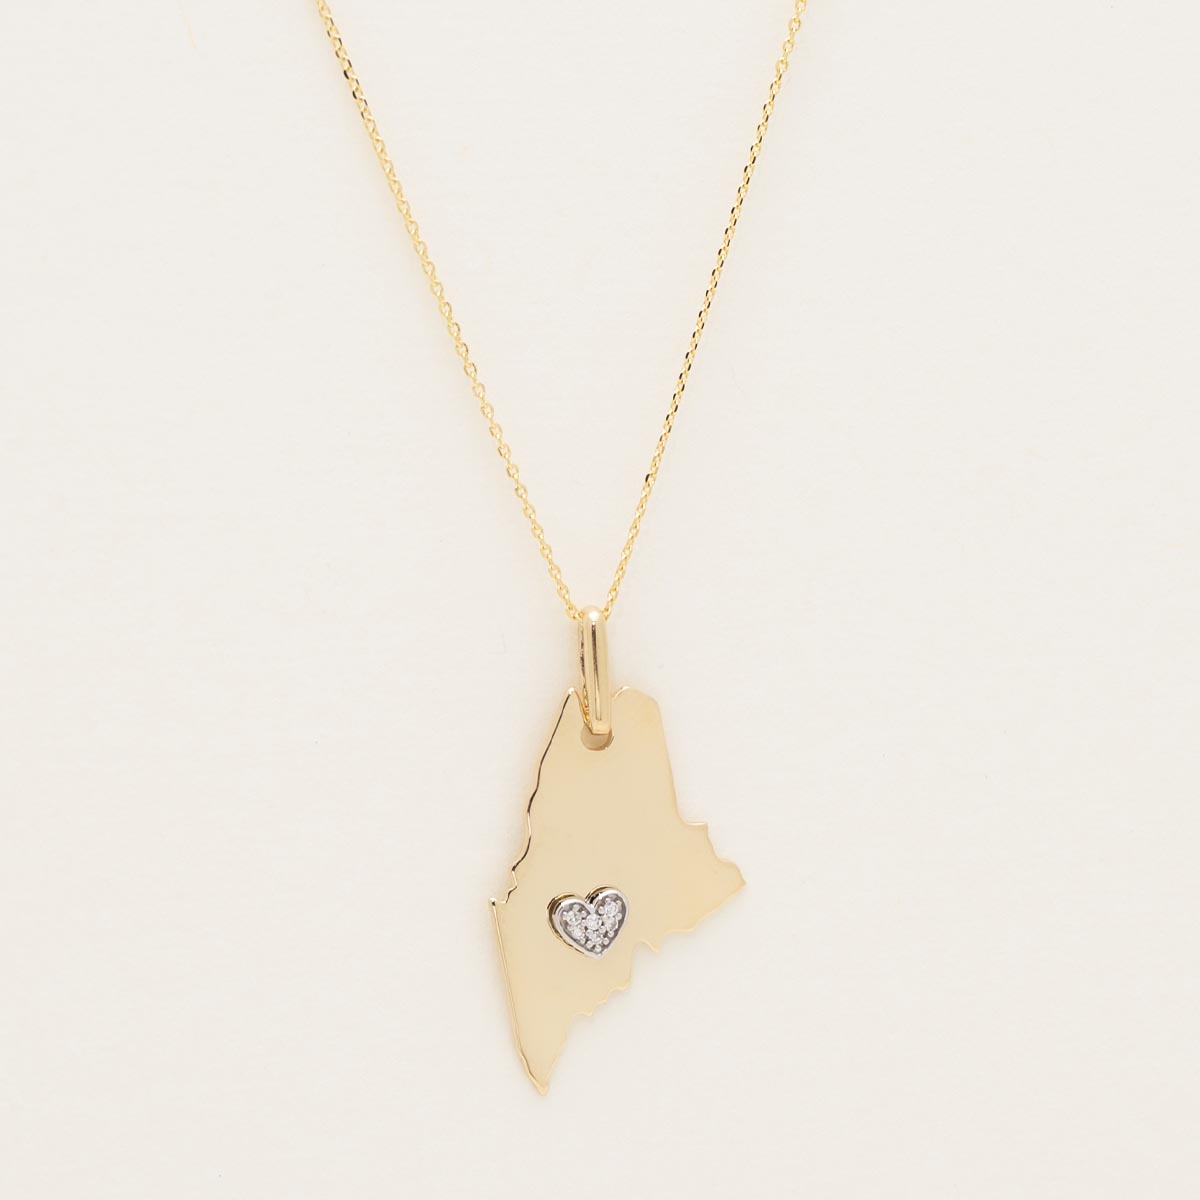 State of Maine Necklace in 14kt Yellow Gold with Diamonds (.02ct tw)